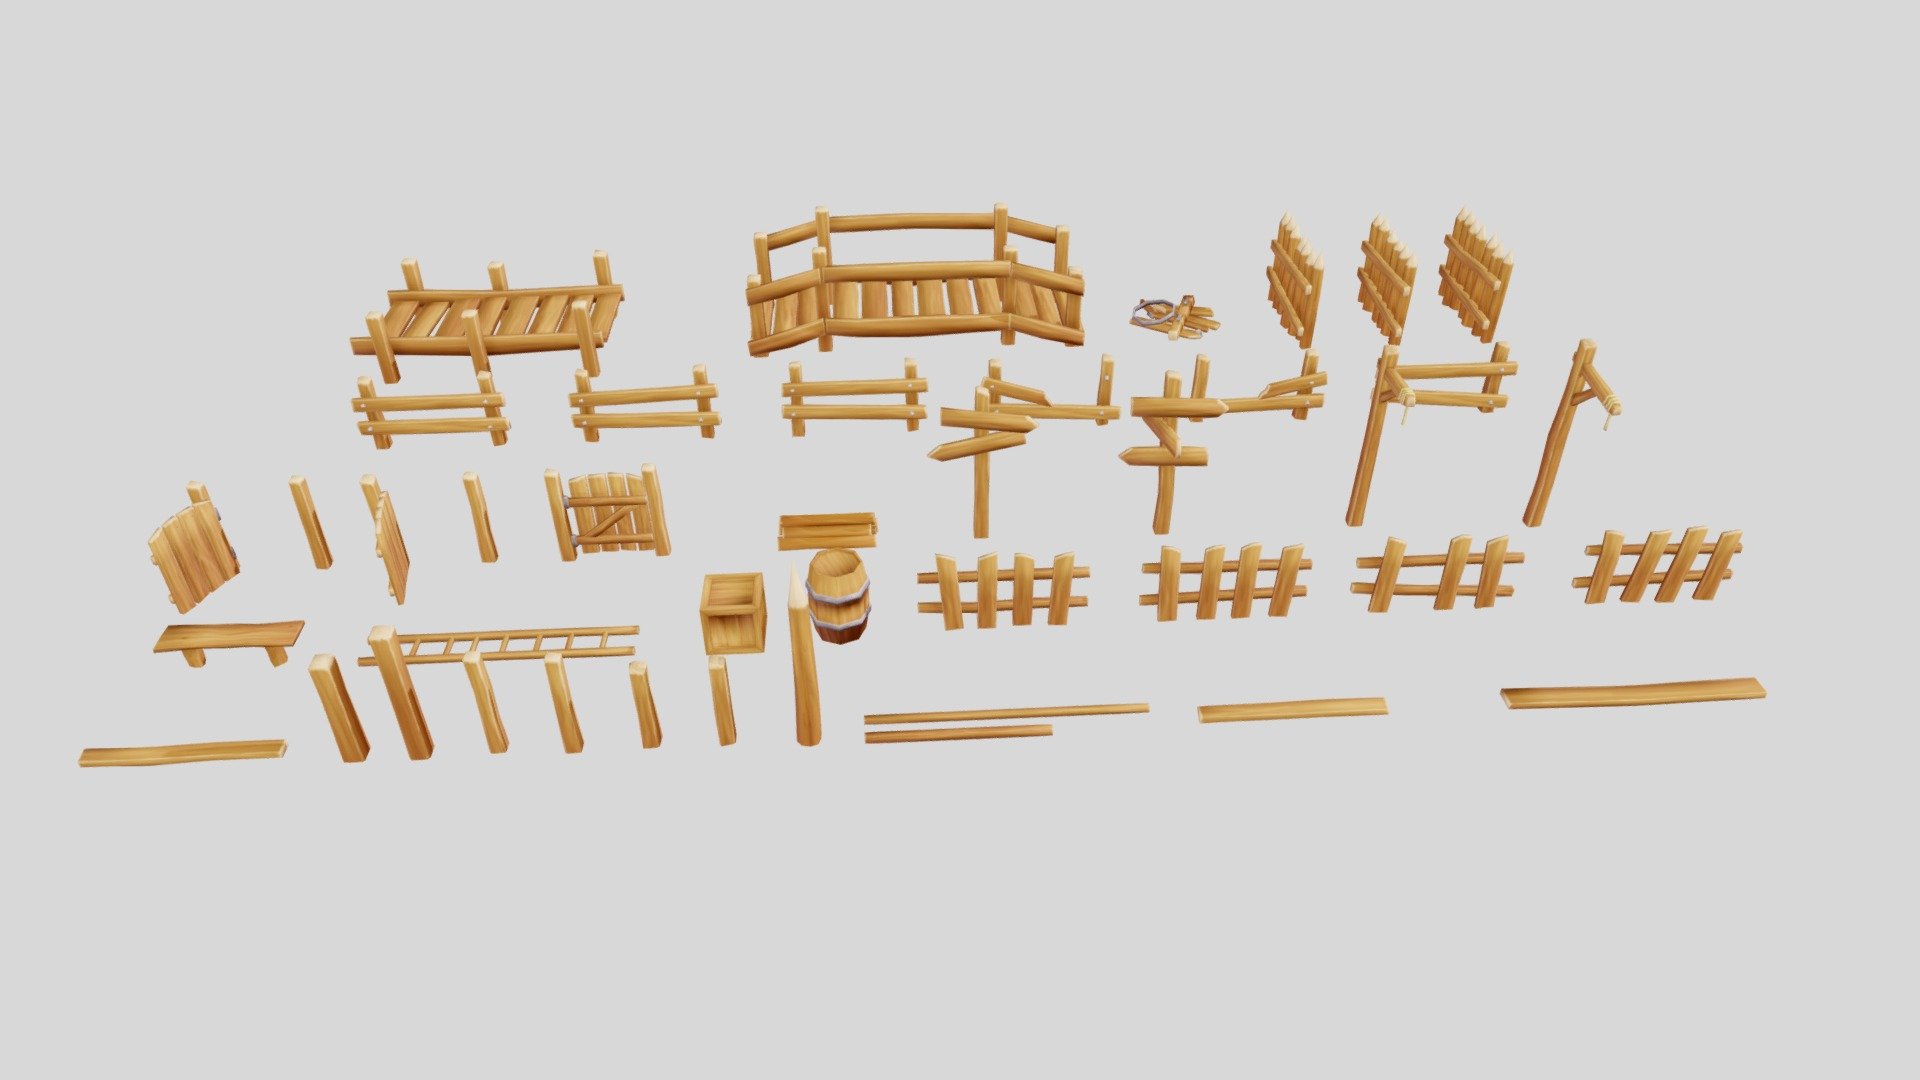 43 Modular parts to build exactly what you need. Nicely done hand painted texture in medieval fantasy style. This pack contains wooden fences, gate, bridges,ladder, barrel, box and etc. With this package you can easy build wooden fence around your fortress or home. It's readily available to import in Unity3D and Ue4.

Package contains:

Bridge (Verts 650, Faces 560, Tris 1000)

Fence (Verts 150, Faces 100, Tris 200)

Gate (Verts 130, Faces 100, Tris 220)

Lader (Verts 130, Faces 100, Tris 200)

Pointer (Verts 80, Faces 70, Tris 140)

Barrel (Vetss 110, Faces 100, Tri 200)

Box (Verts 70, Faces 55, Tris 108)

Bench (Verts 78, Faces 60, Tris 120)

Logs (Verts 174, Fces 129, Tris 300)

Trash (Verts 208, Faces 180, Tris 366)

for one single object

All Package Verts 5800,Faces 5000, Tris 9600

Textures:

The texture is one single atlas. Hand painted png 2048x2048 - Modular Wooden Prop Pack - 3D model by Crazy_8 (@korboleevd) 3d model